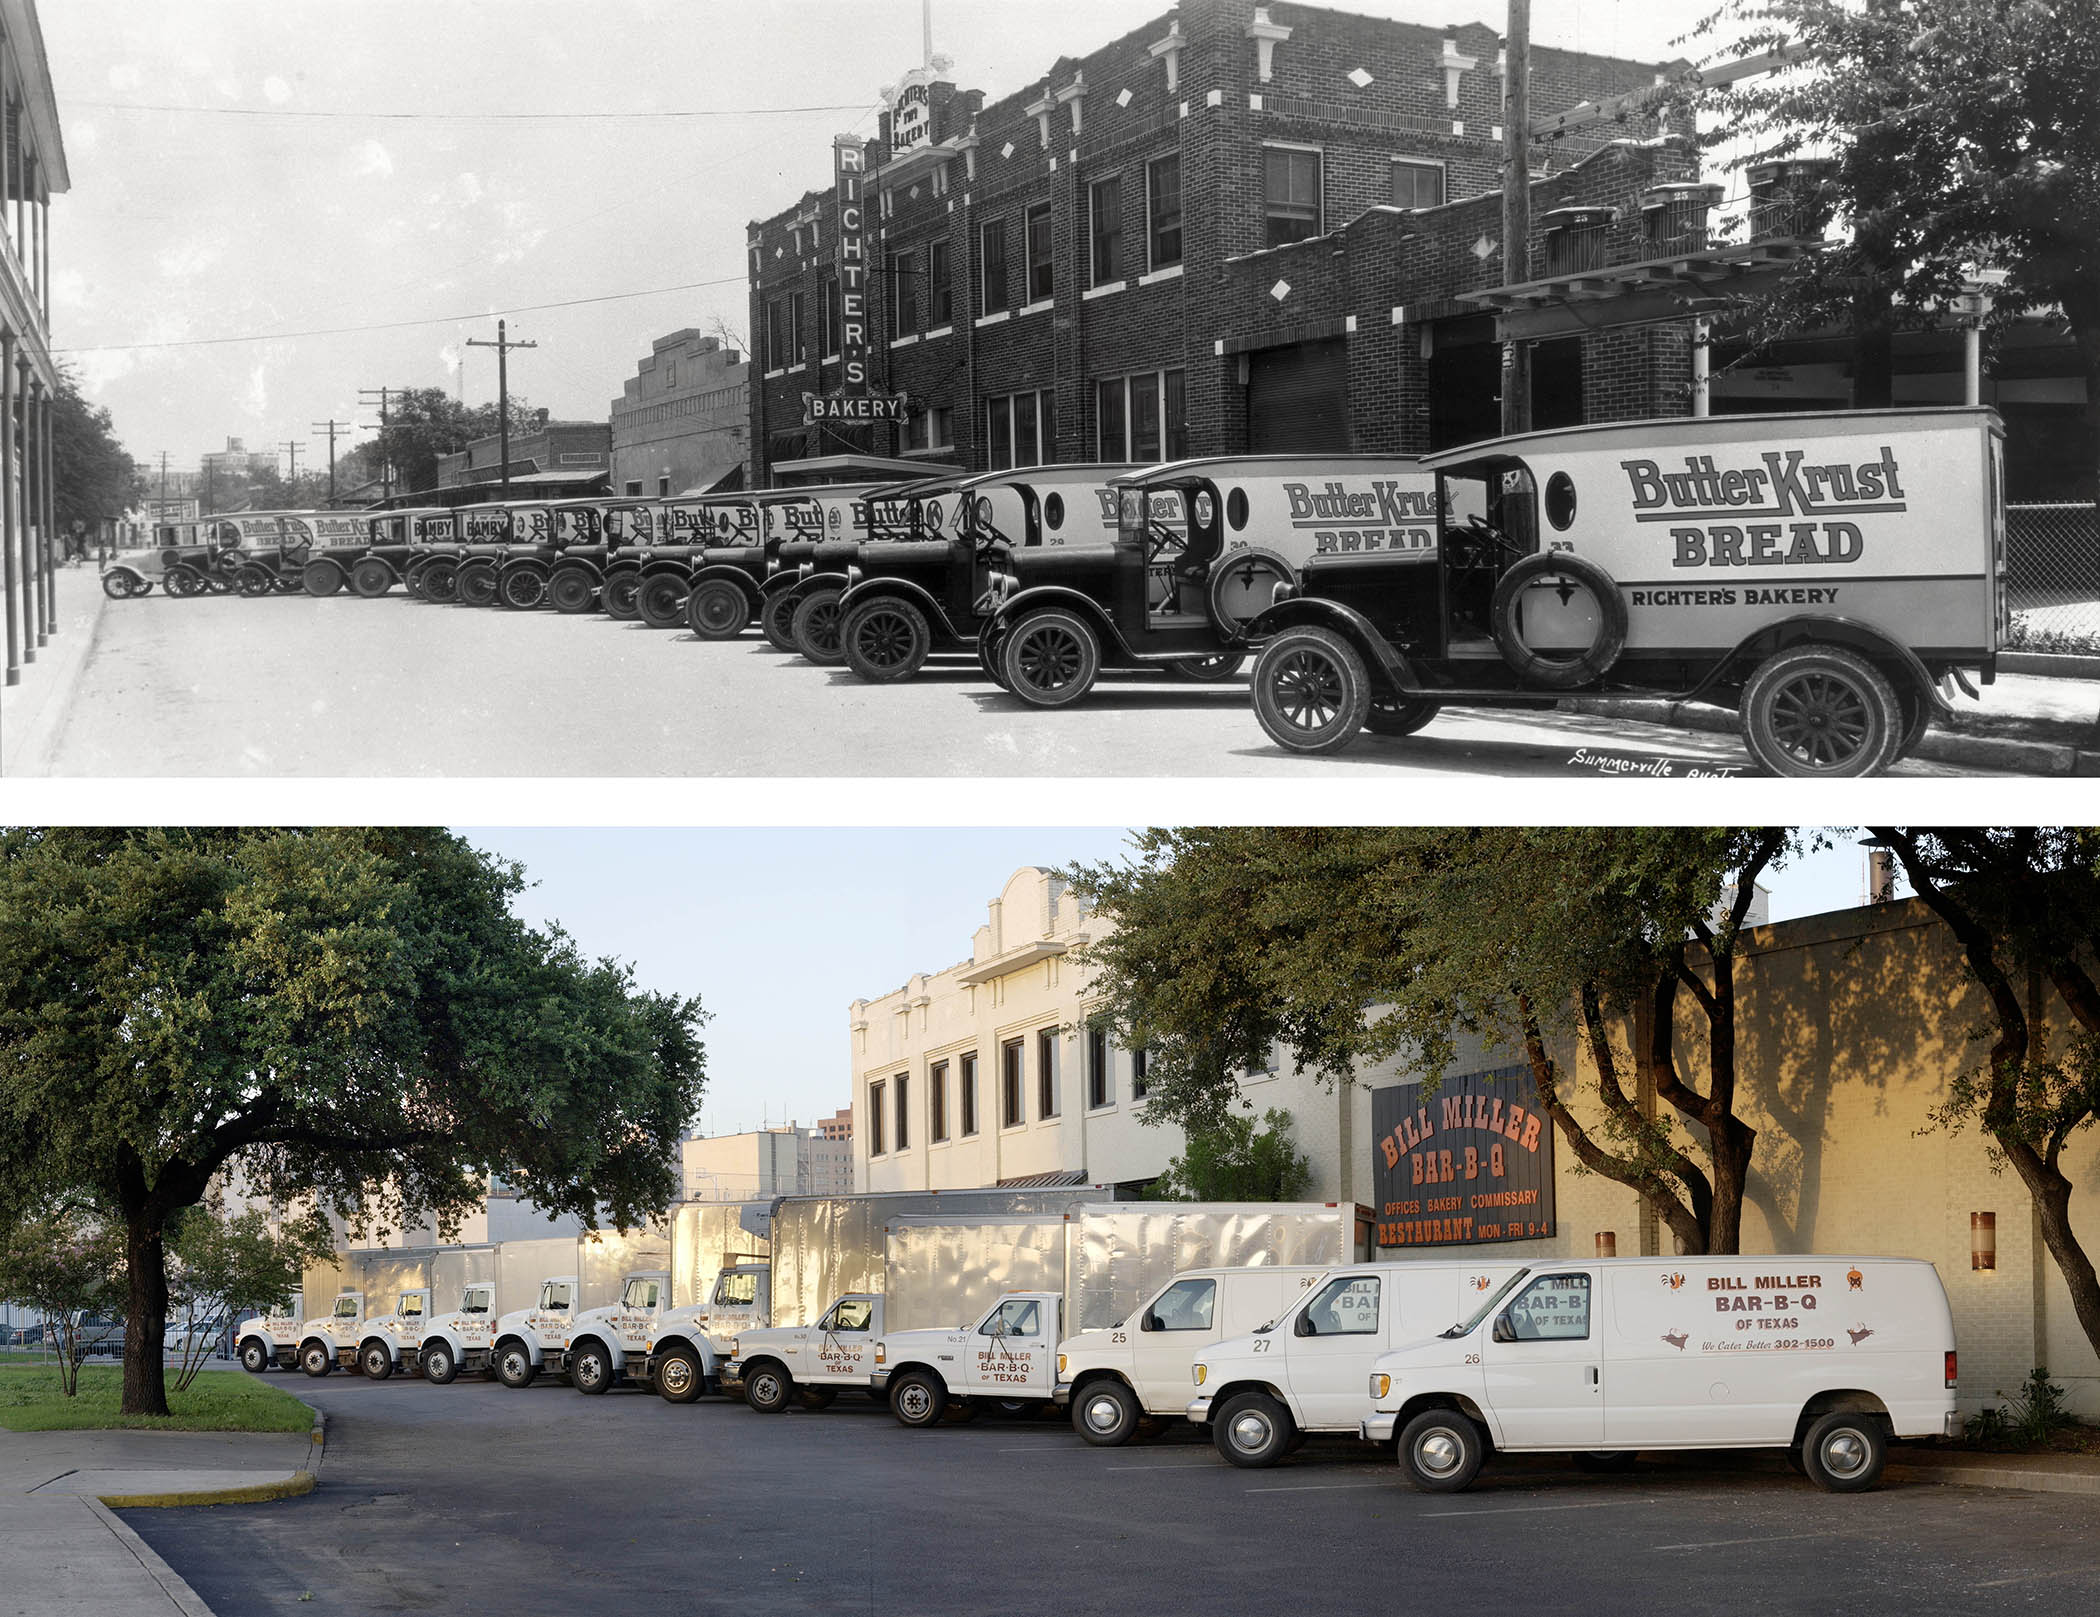 Butter Krust trucks lined in front of the building. Bottom image includes Bill Miller vans parked in front of the Bill Miller plant